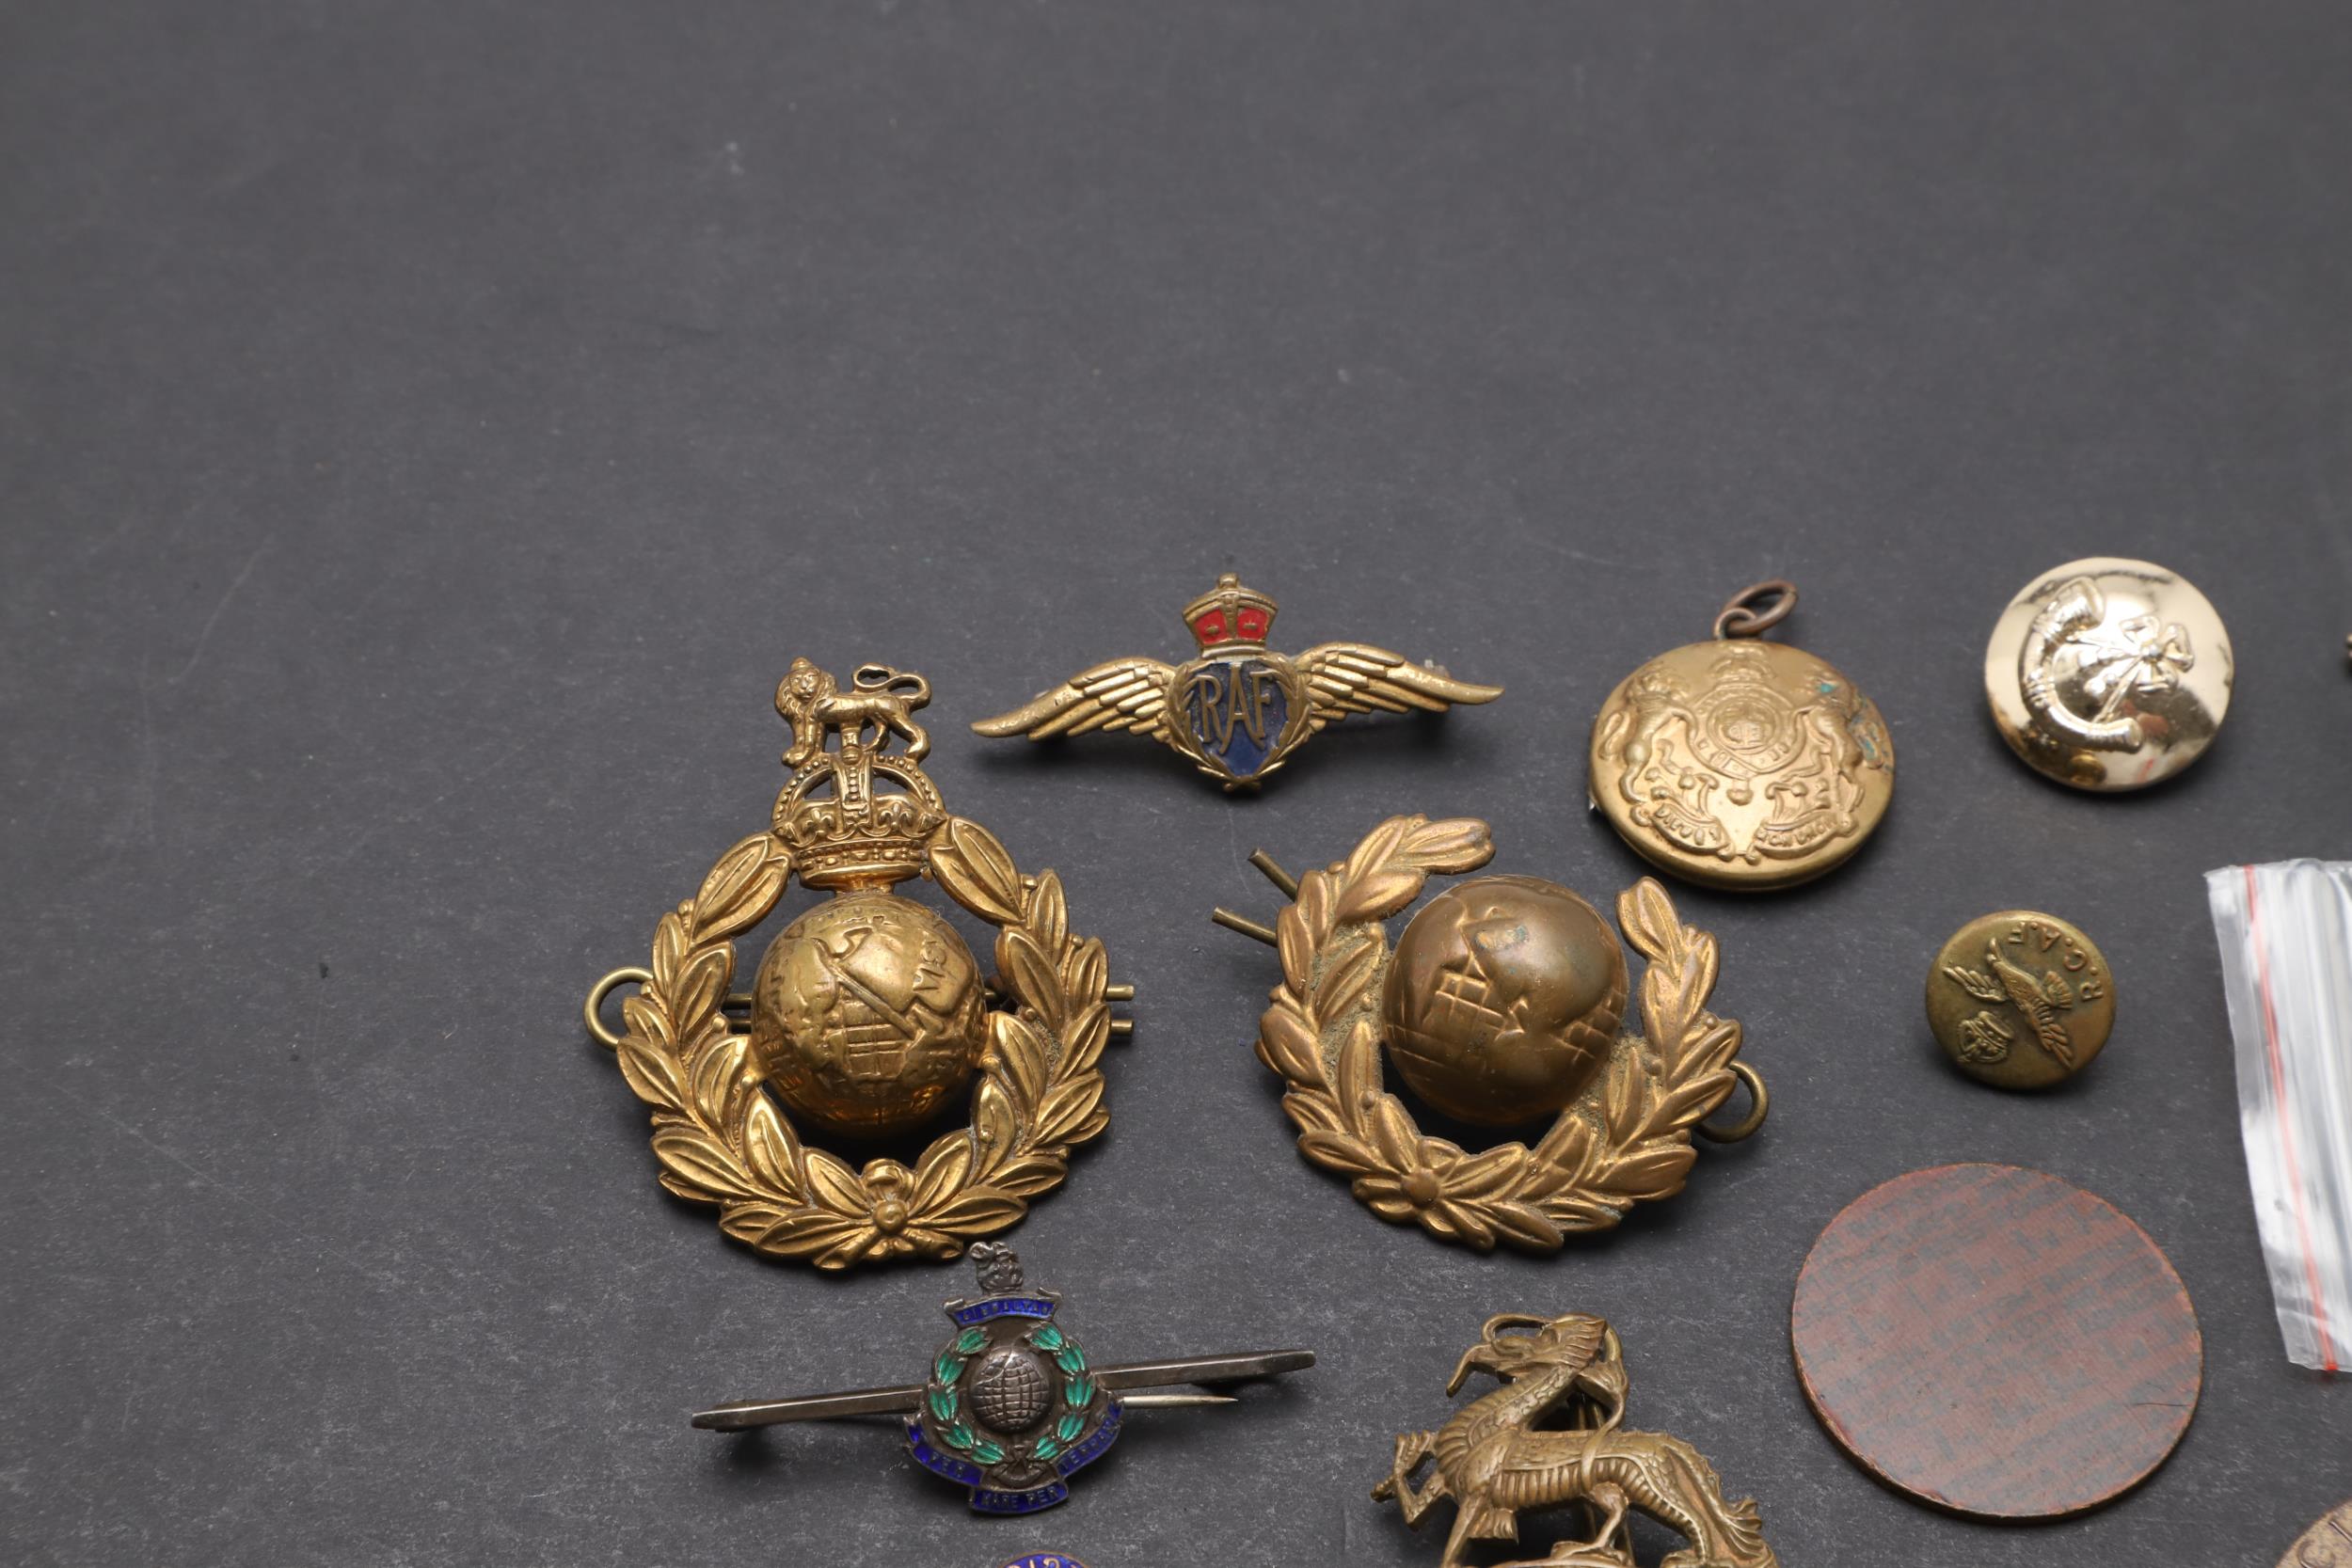 AN INTERESTING COLLECTION OF MILITARY BADGES, BUTTONS AND INSIGNIA. - Image 2 of 9